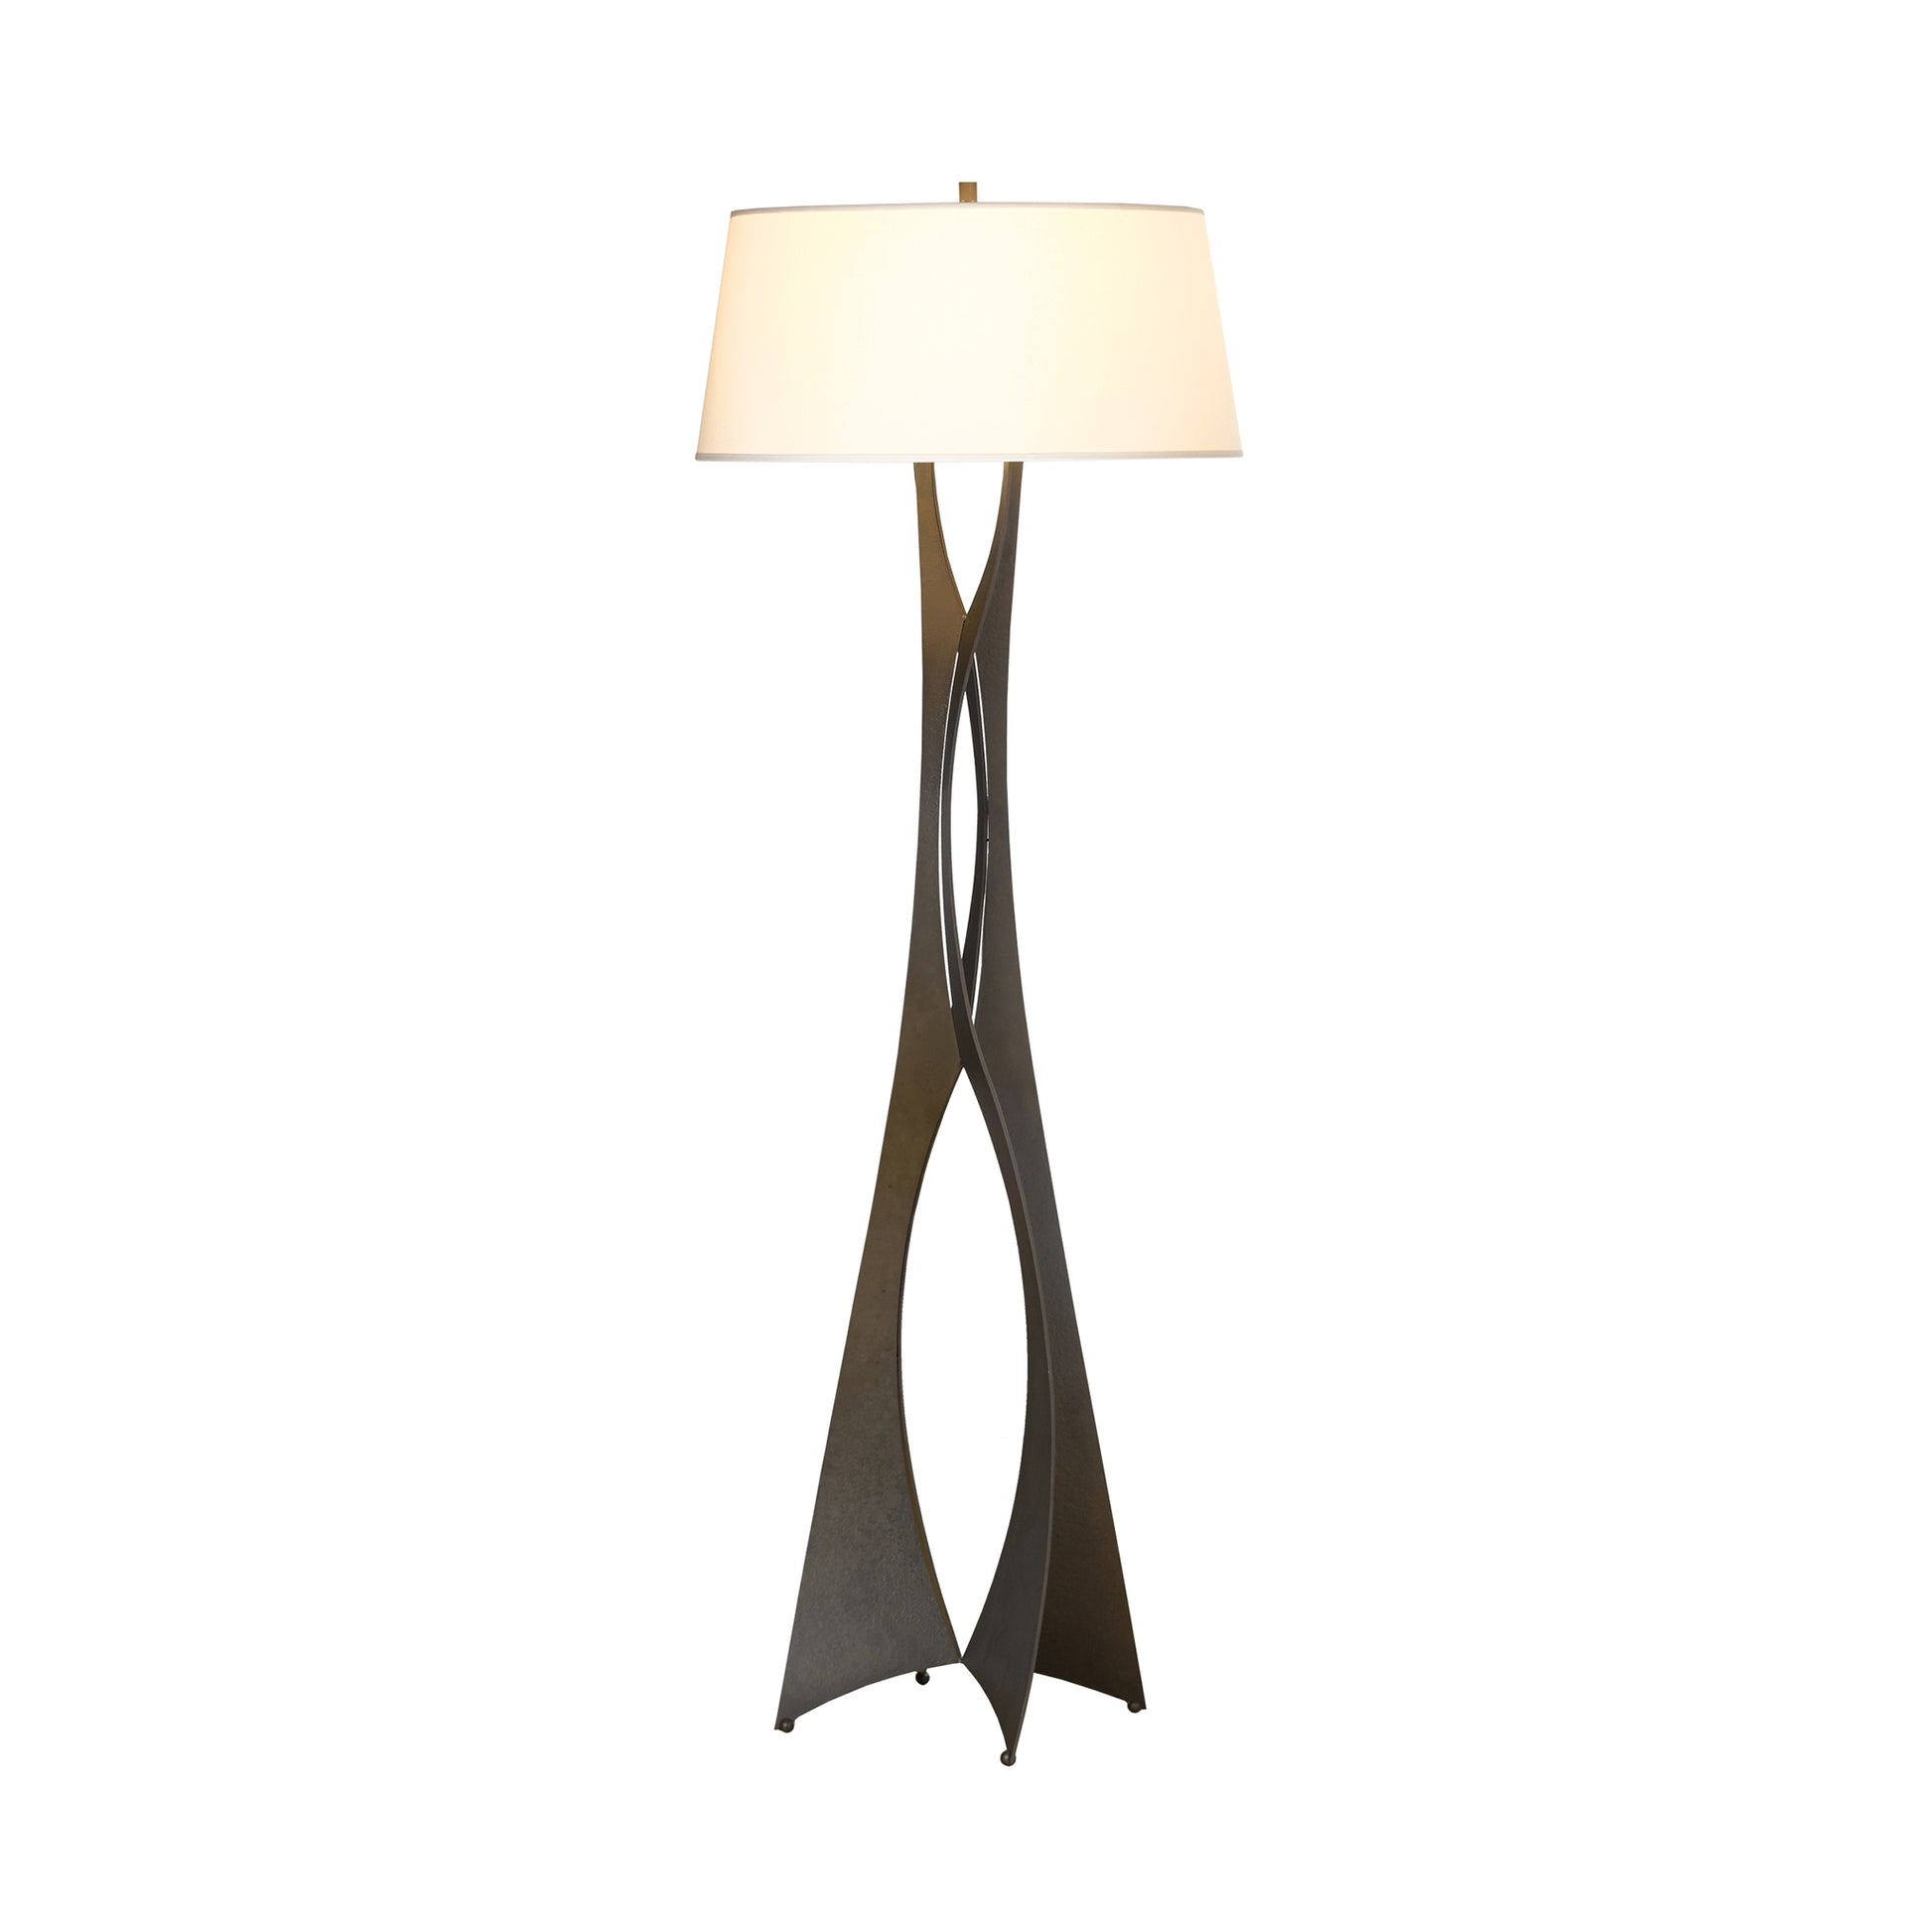 A modern Hubbardton Forge Moreau Floor Lamp with a slim, twisting metal finish base that intertwines upwards to support a broad, horizontal fabric shade. The lamp stands isolated against a white background.